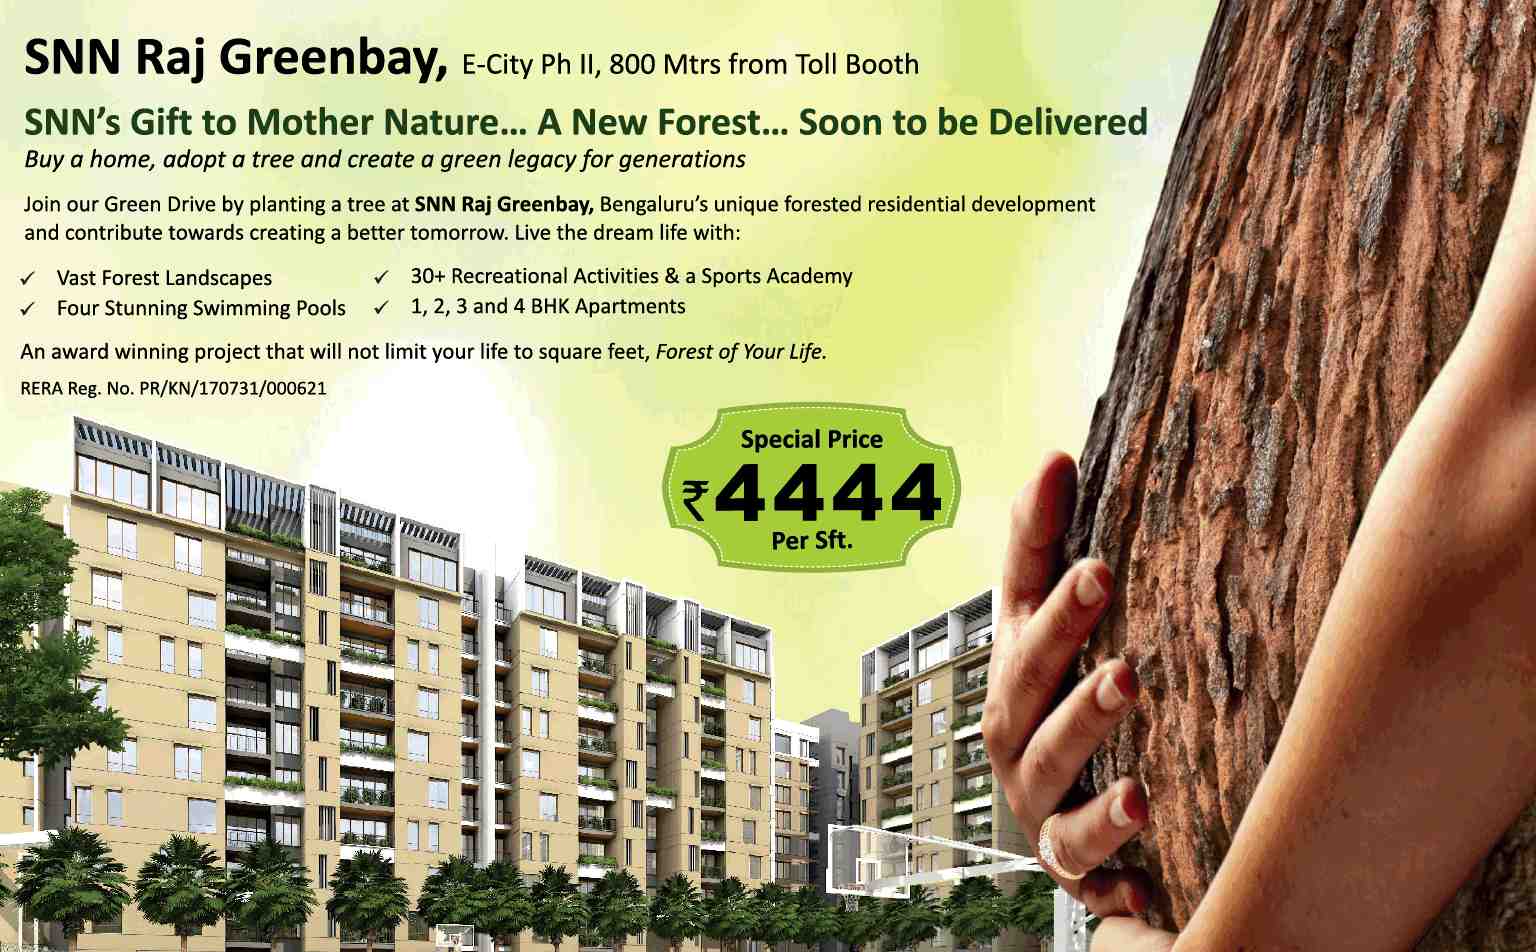 Buy a home, adopt a tree and create a green legacy for generations at SNN Raj Greenbay in Bangalore